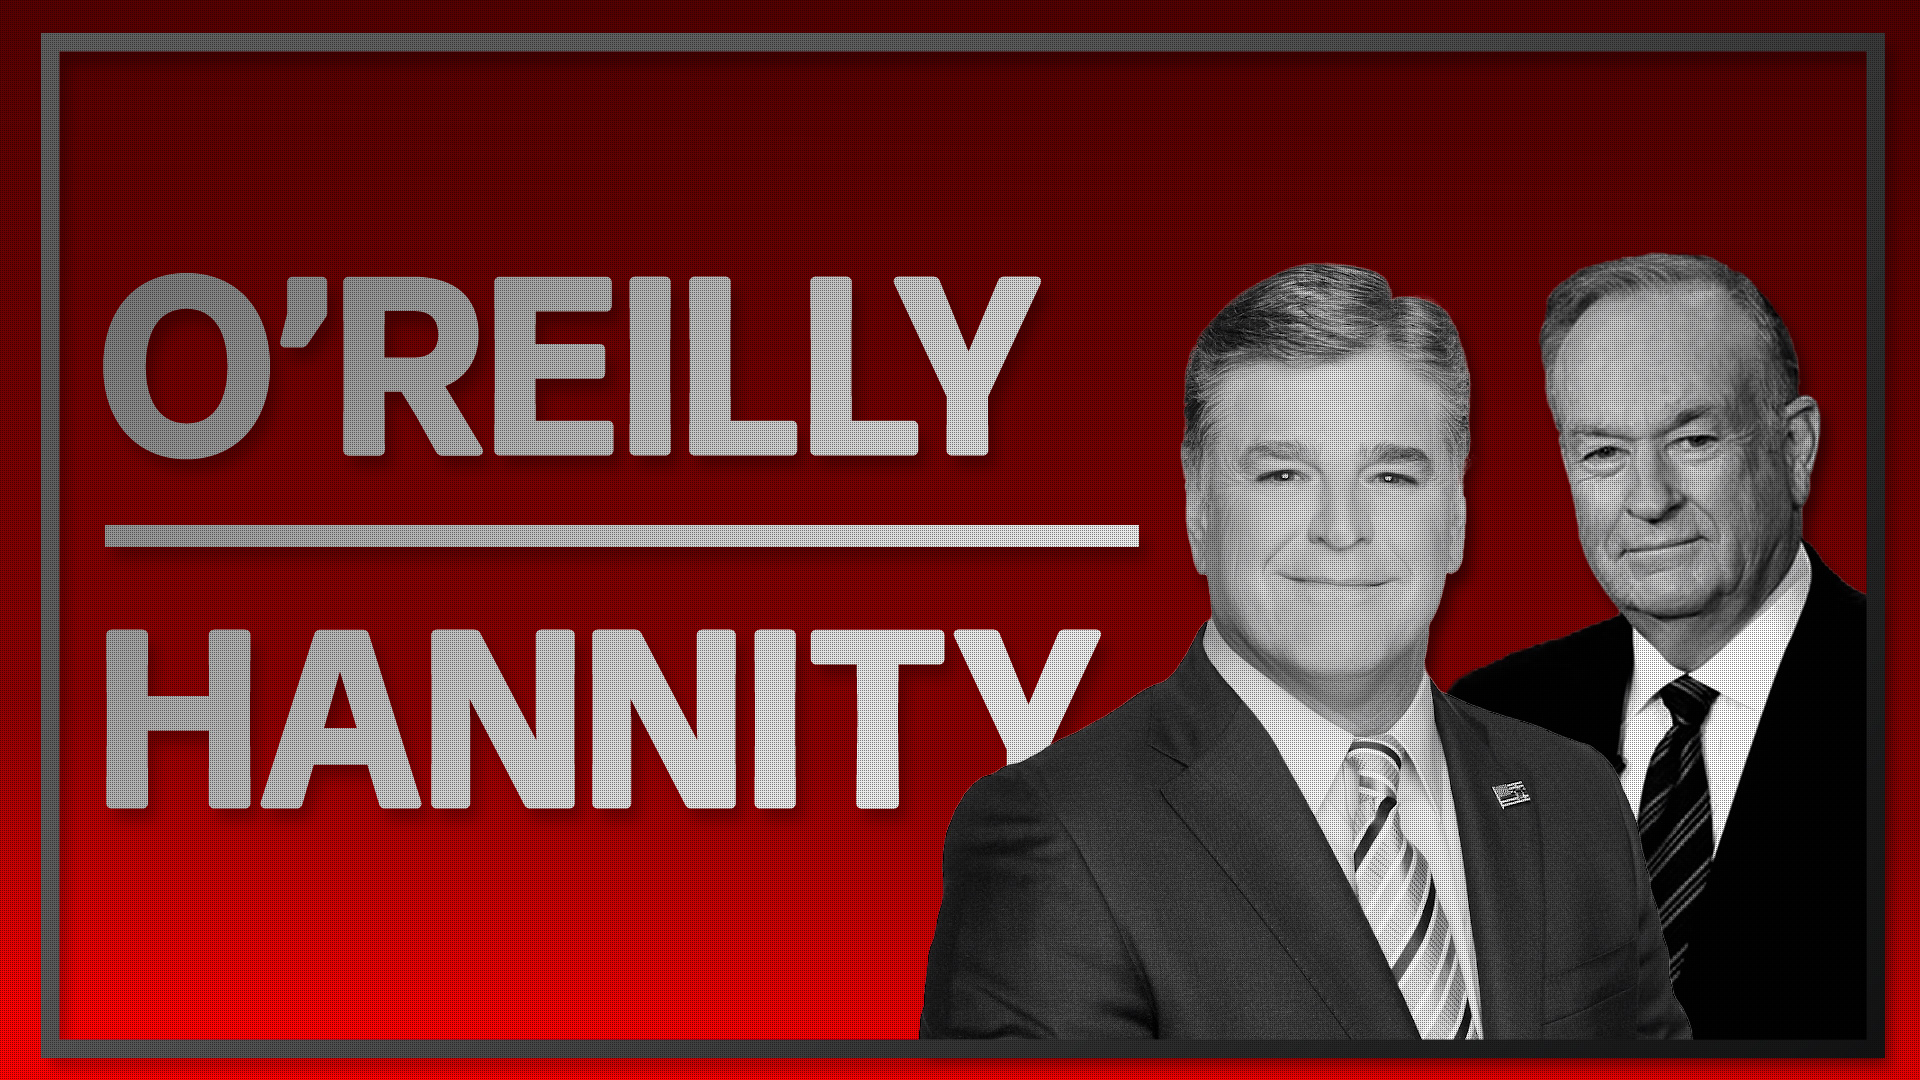 Listen: O'Reilly and Hannity on the 'Revolting' Trump Trial